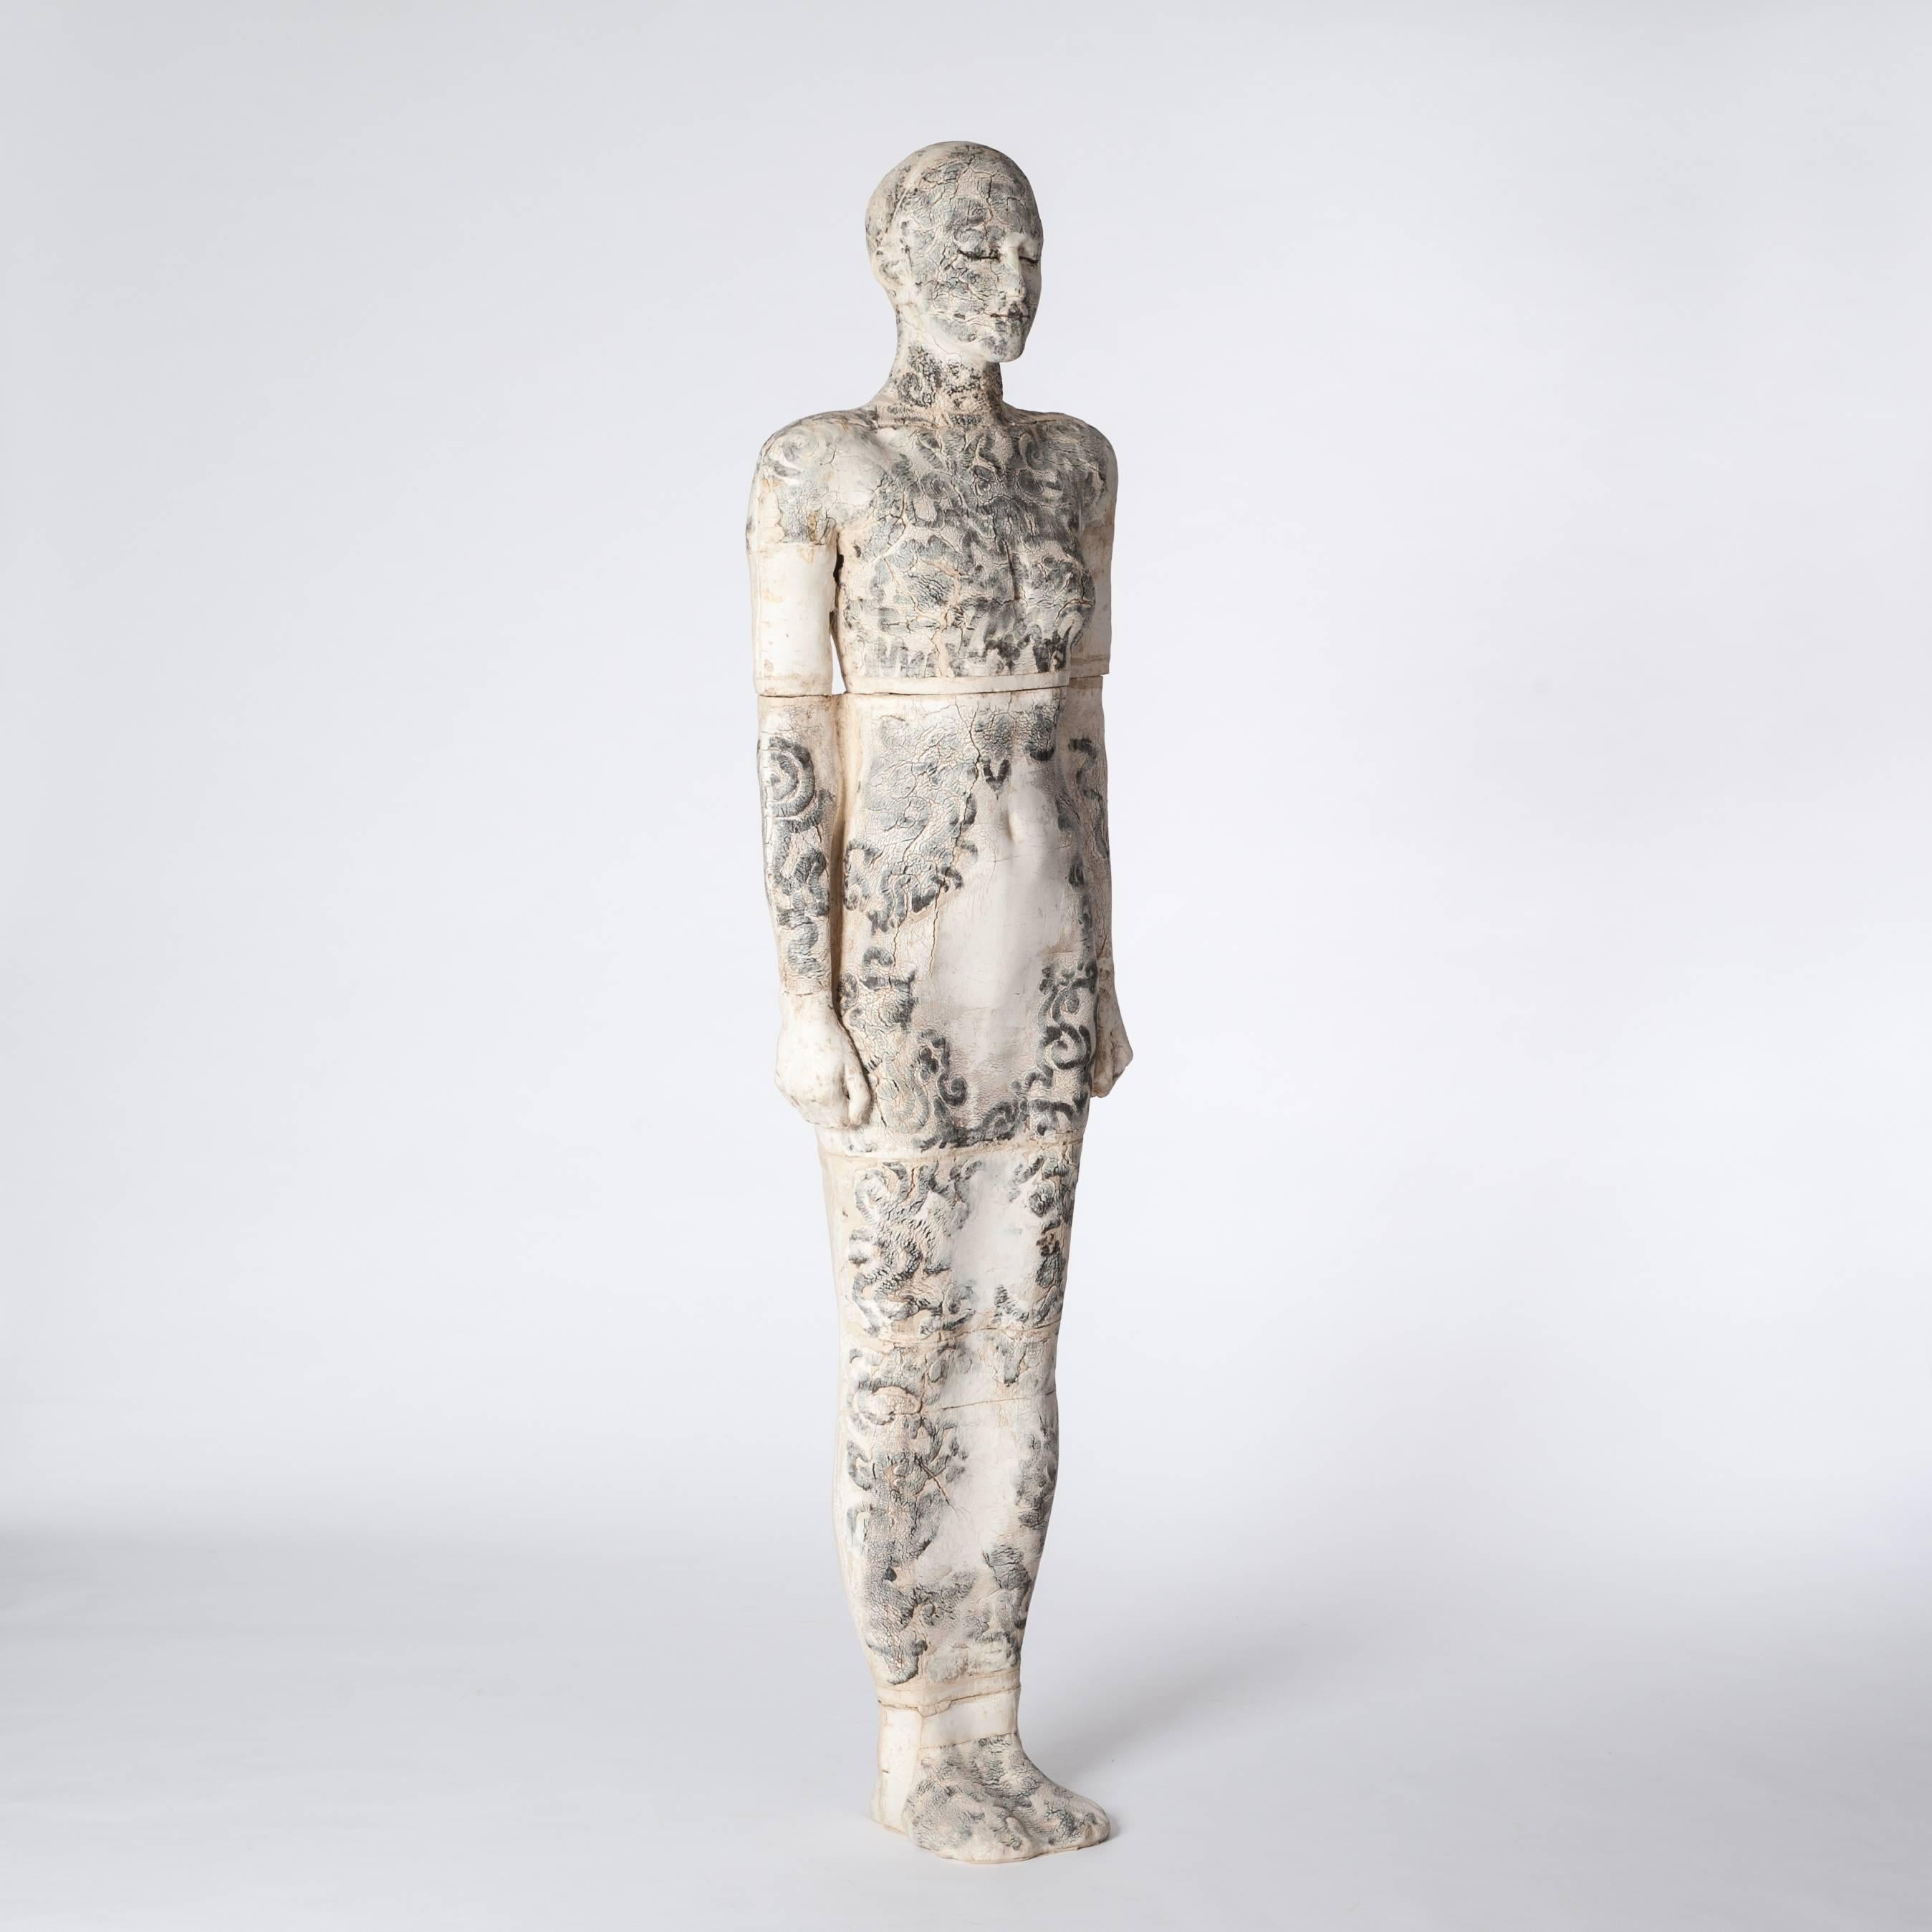 Zeitlosnah (“timeless and close”) 
This series of lifesize female sculptures exuding a static aura of self-containment was created in 
2013 / 2014. 
Height: 182 cm. 
The sculptures show minimal variations in their bodies, postures and facial